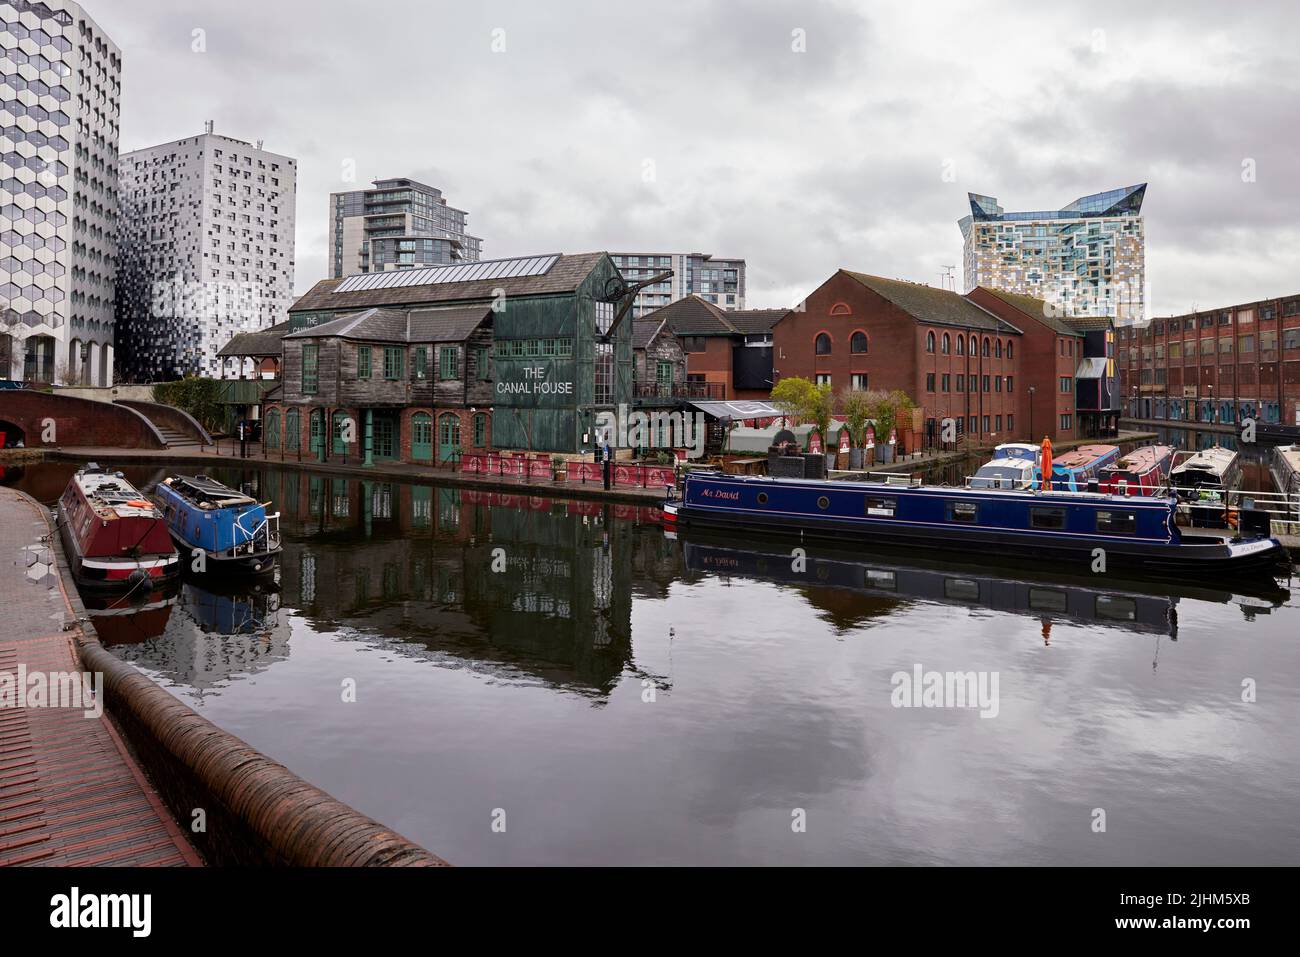 The Canal House in Birmingham, England with canal boats in the foreground and the Cube in the background Stock Photo